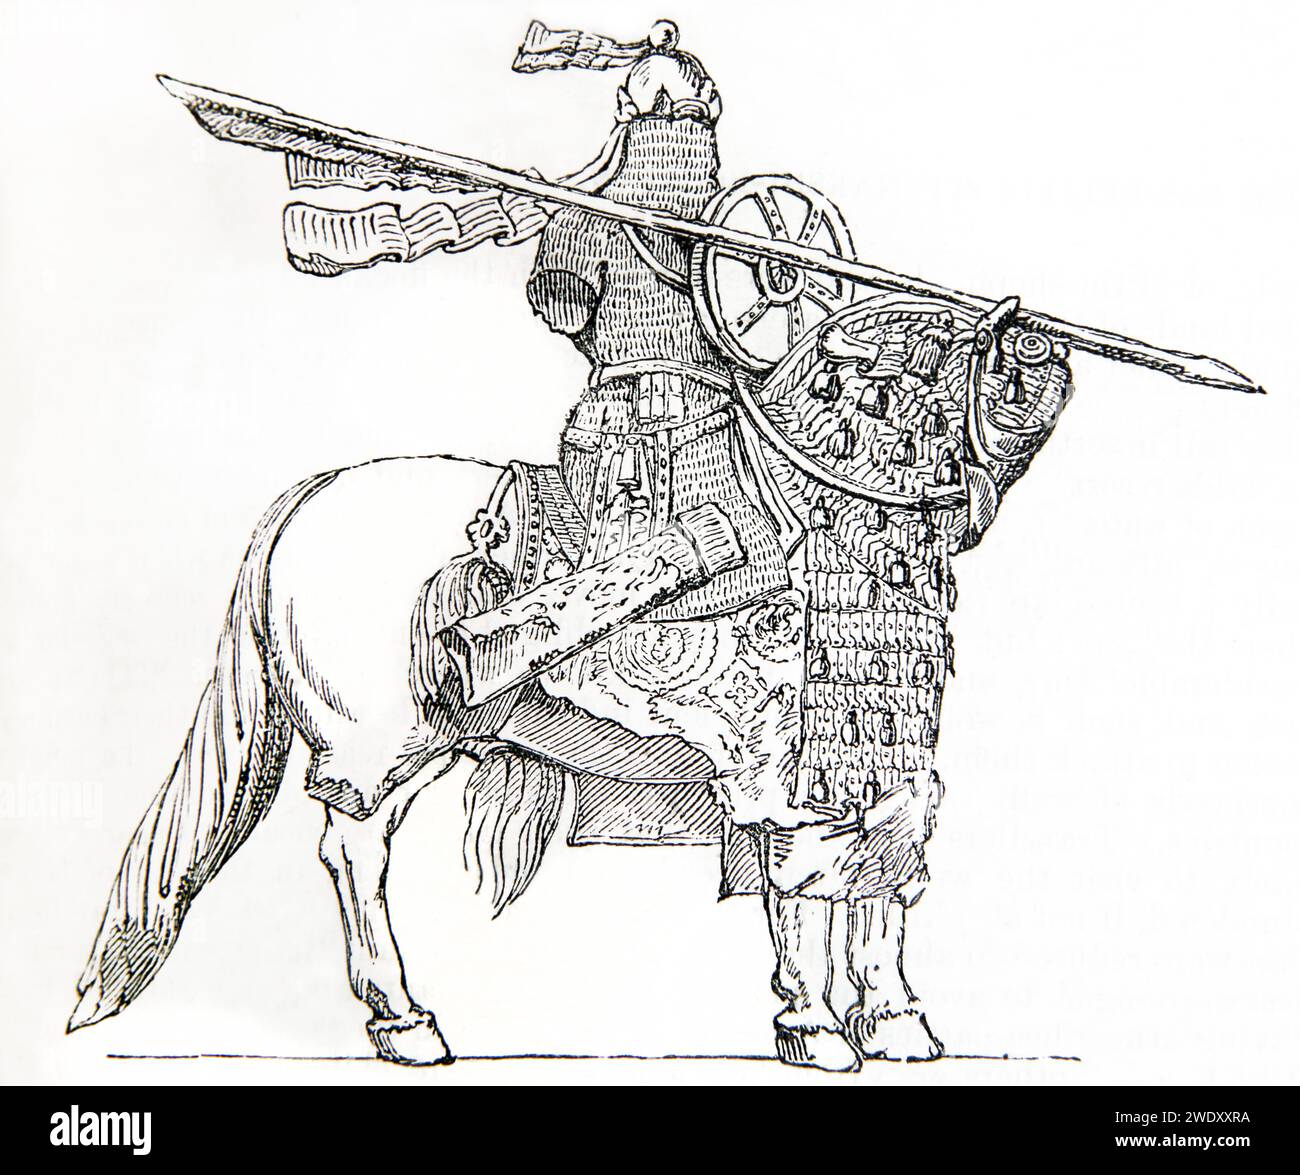 Illustration of Sassanid King Khosrow II Mounted on his Horse Shabdiz at Taq-e Bostan in Iran Wood Engraving from Antique 19th Century Illustrated Family Bible Stock Photo